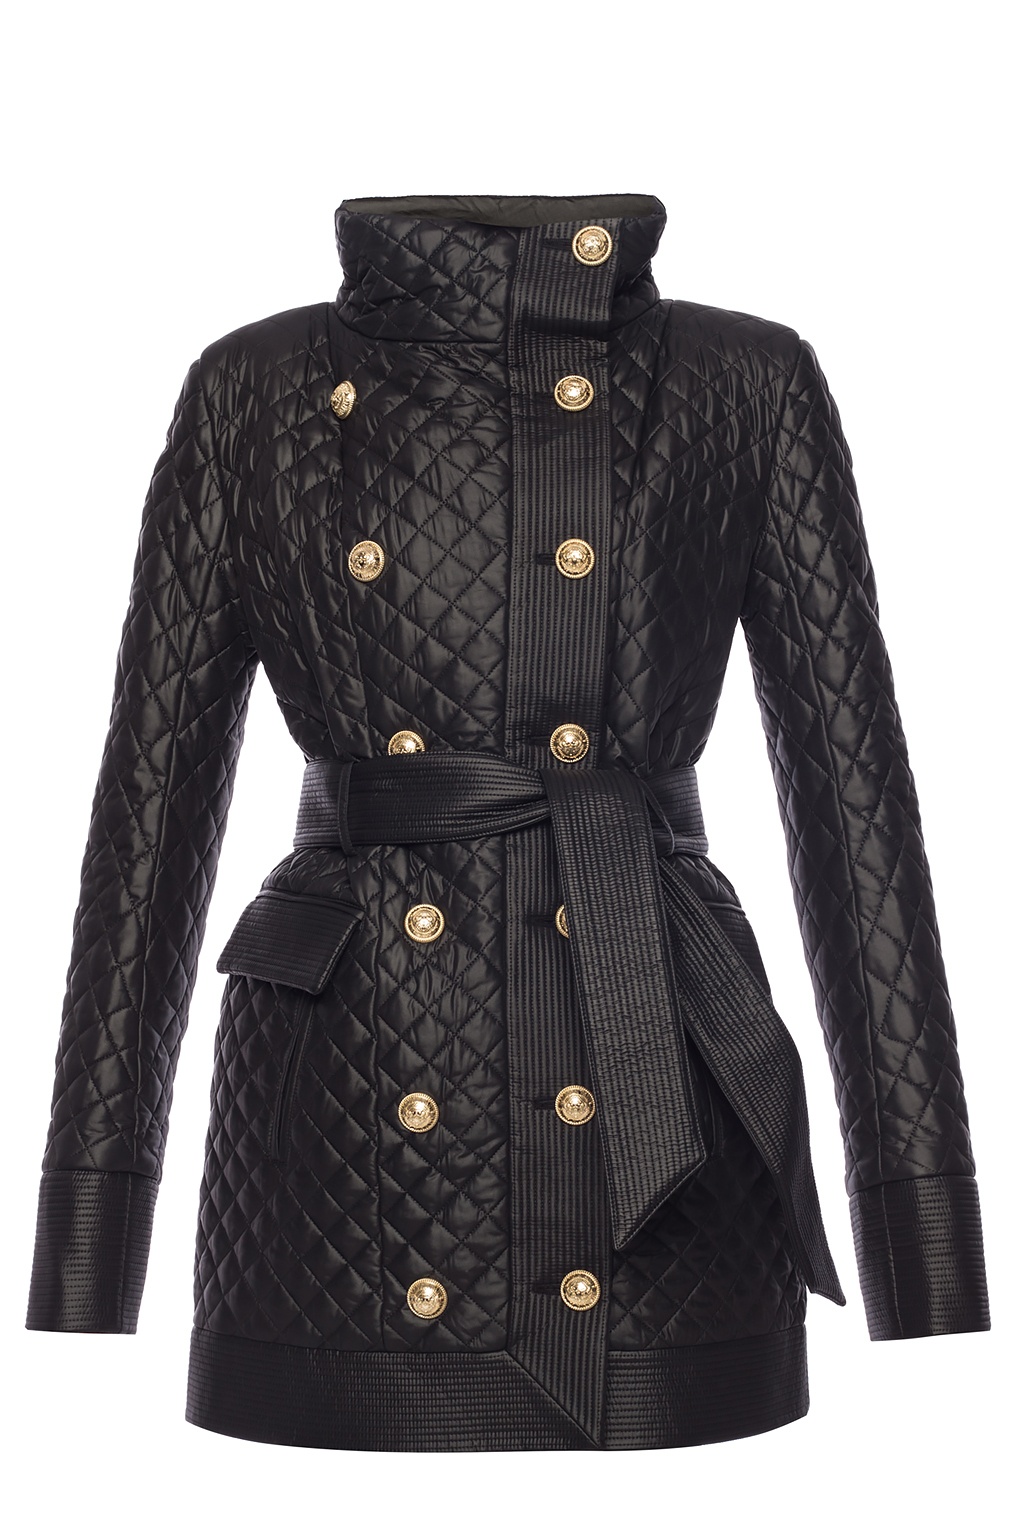 Balmain Belted quilted coat | Women's Clothing